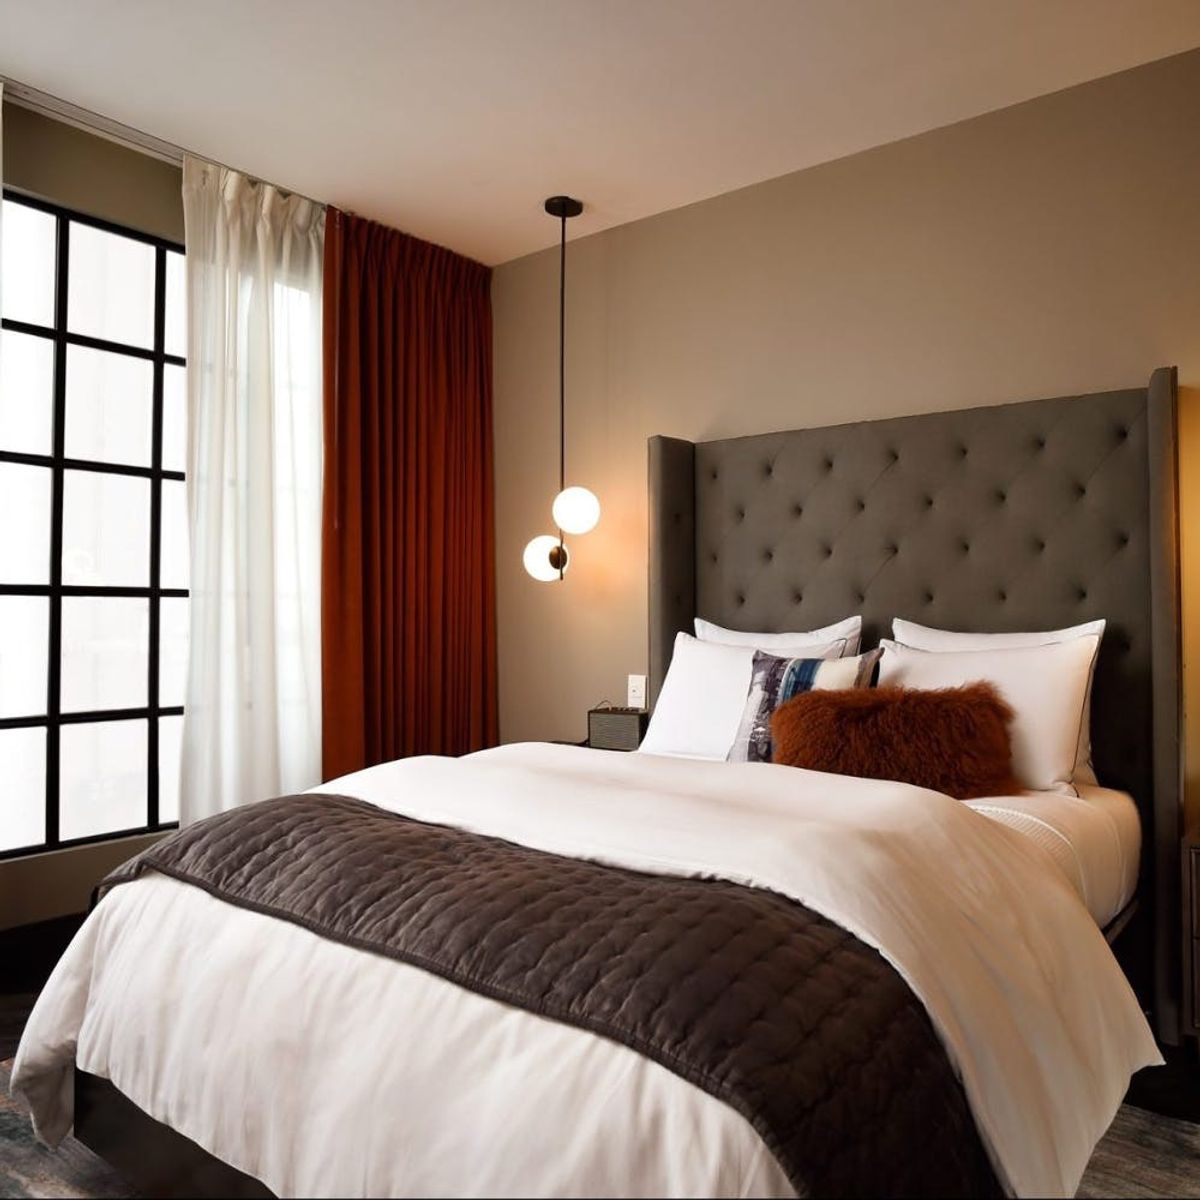 West Elm Is Opening Hotels Where You Can Buy Everything Around You